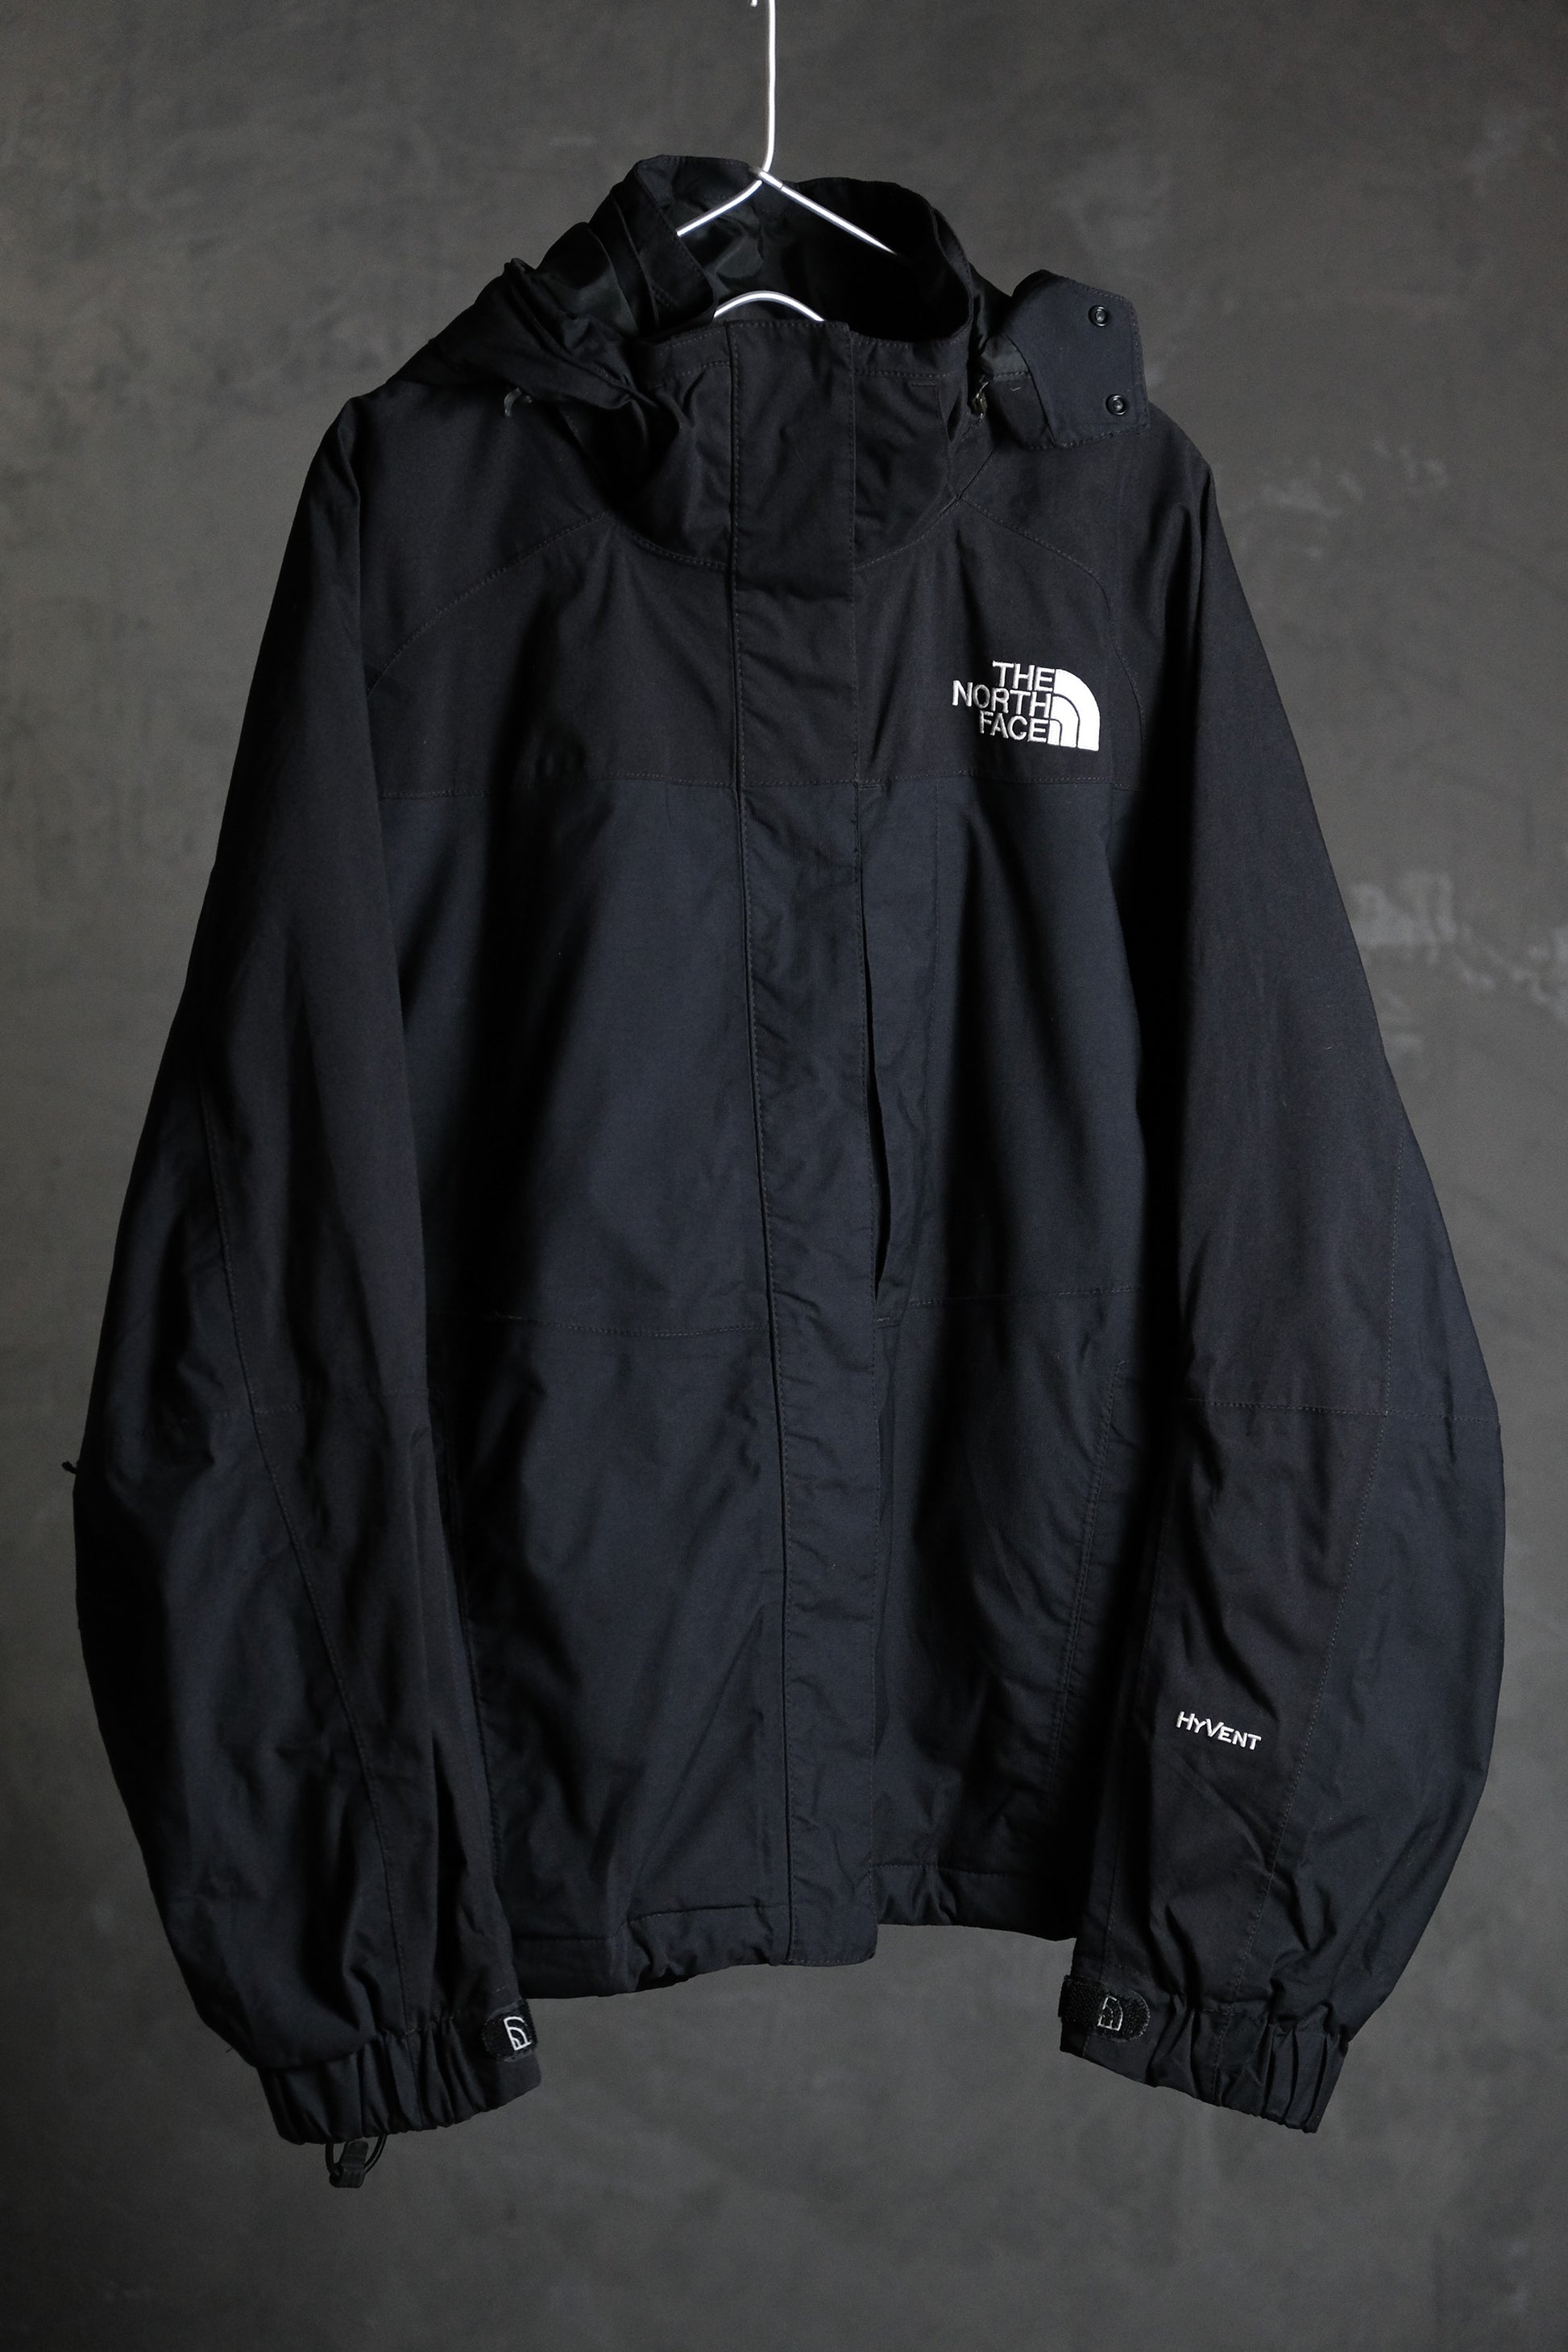 The North Face Hyvent Windbreaker Jacket North Face outdoor function brand  waterproof warm breathable jacket